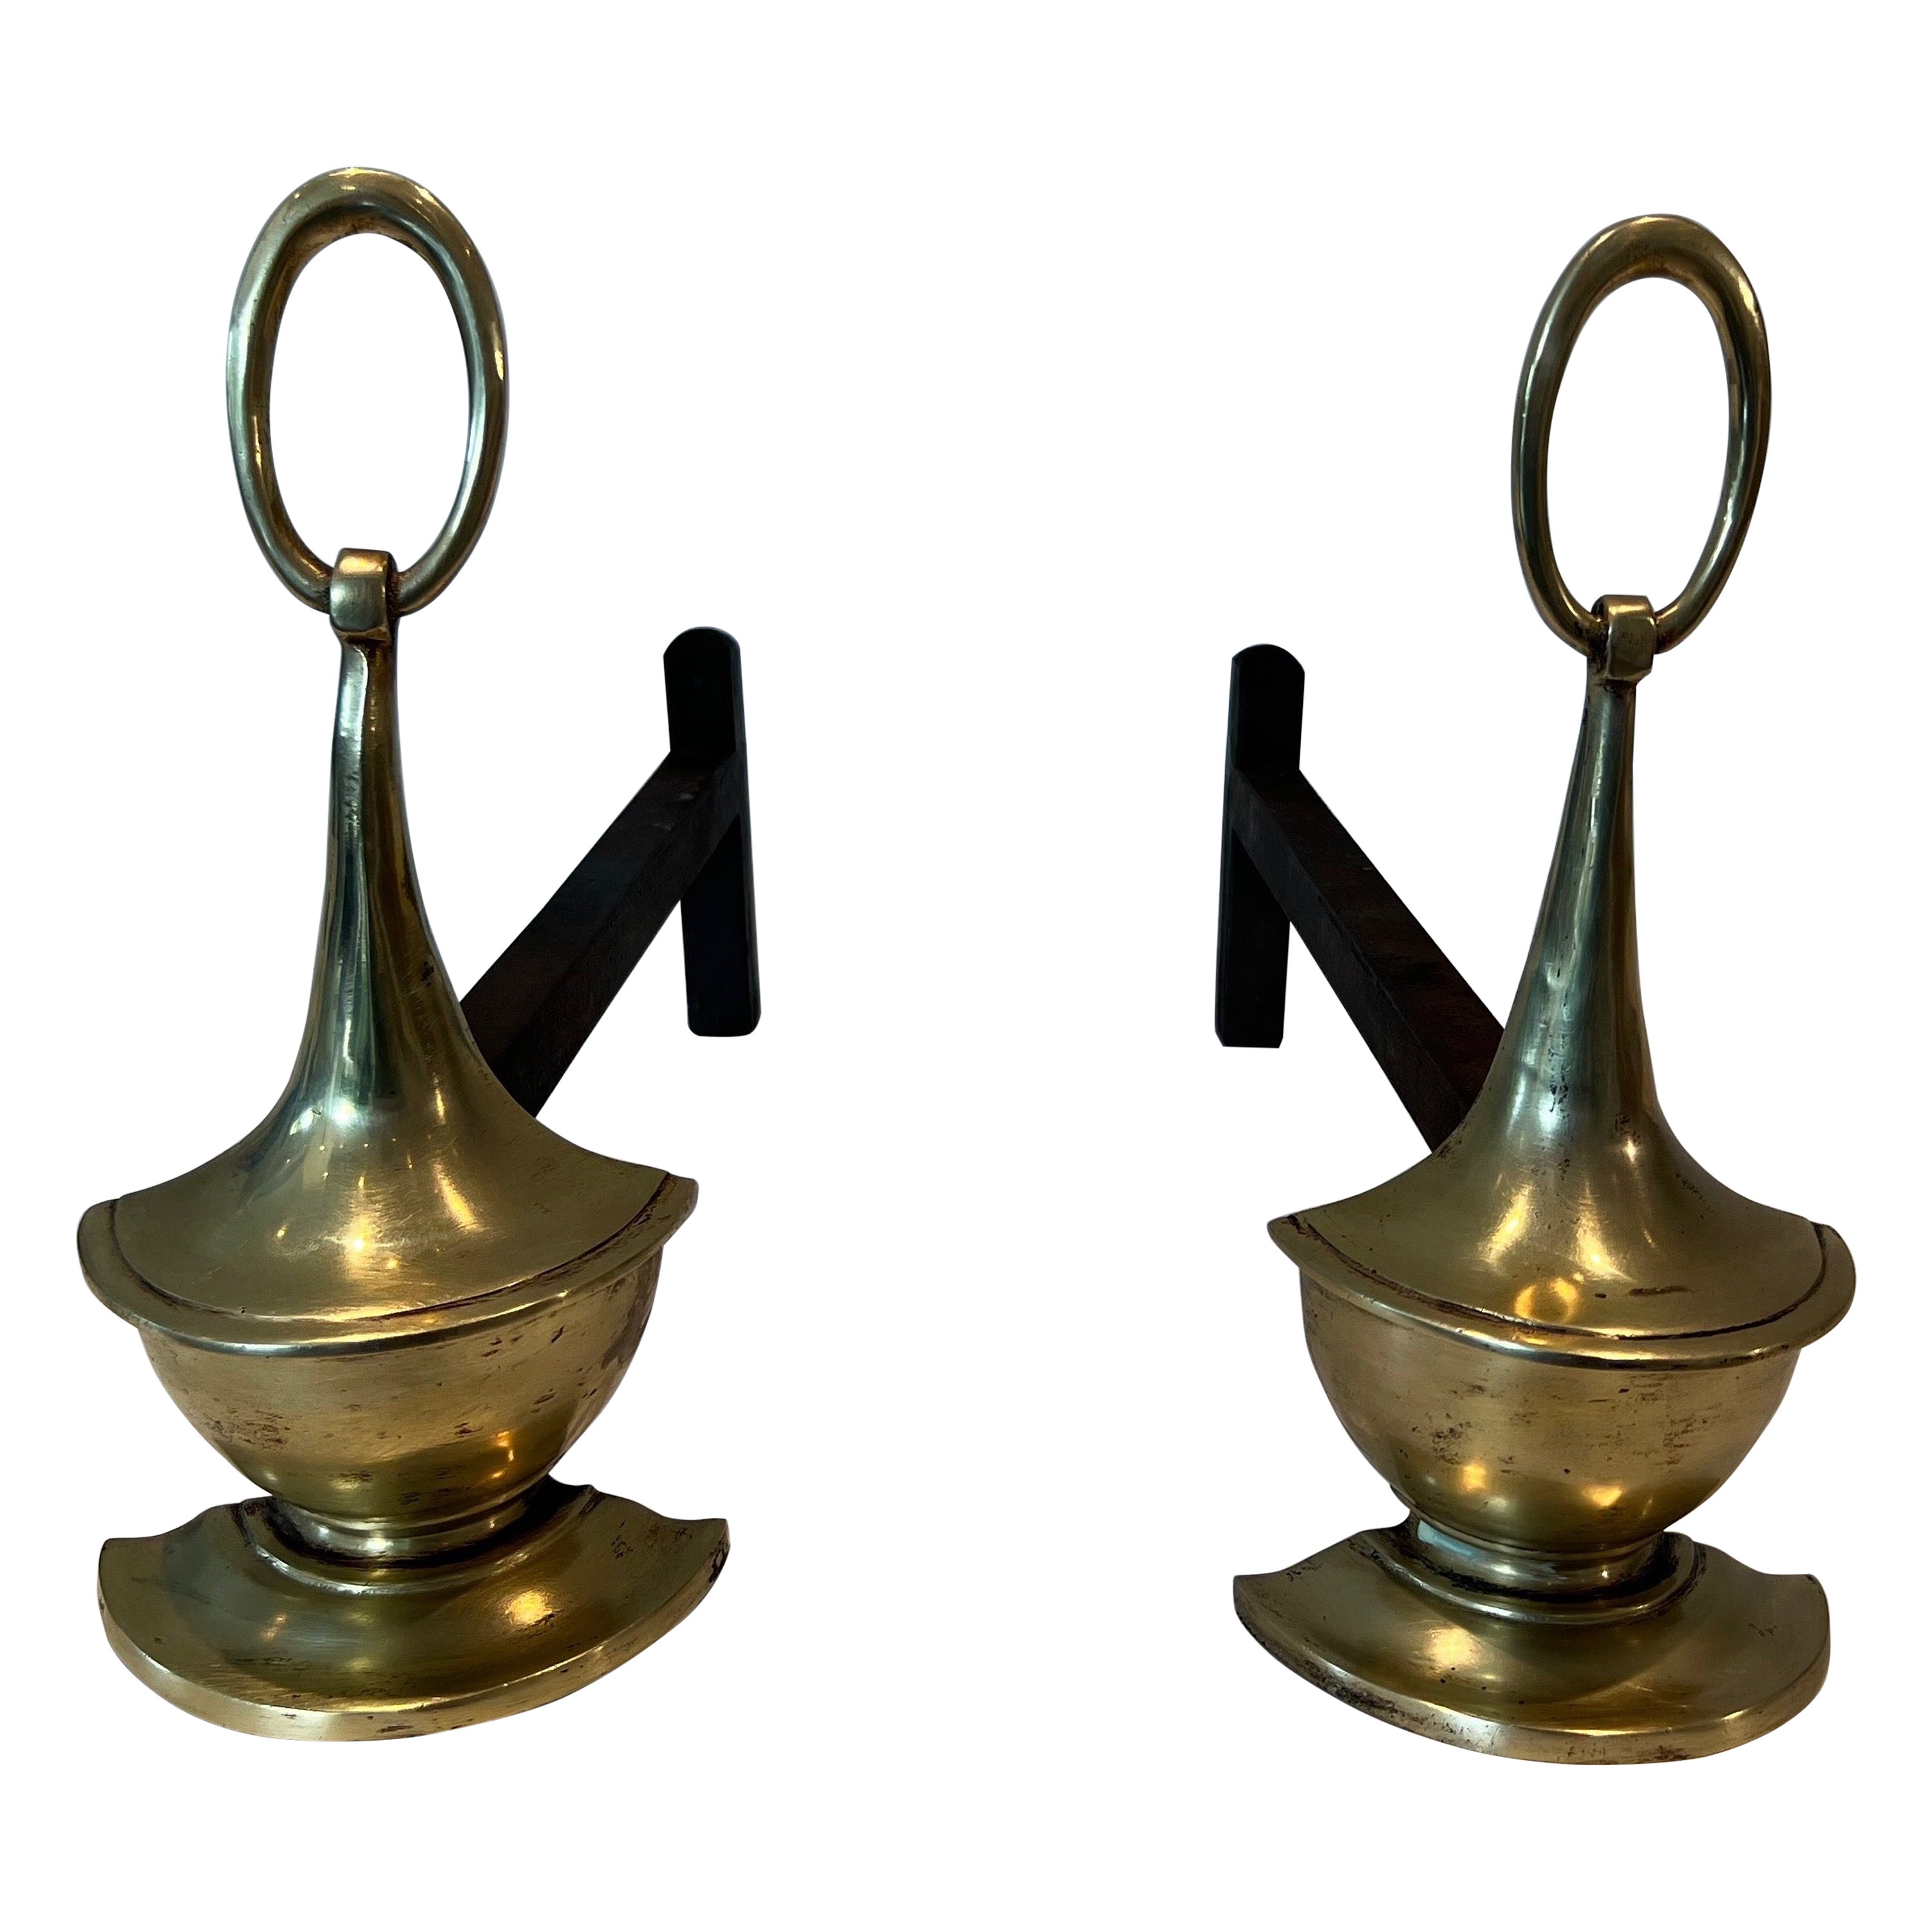 Pair of Neoclassical style Brass Andirons